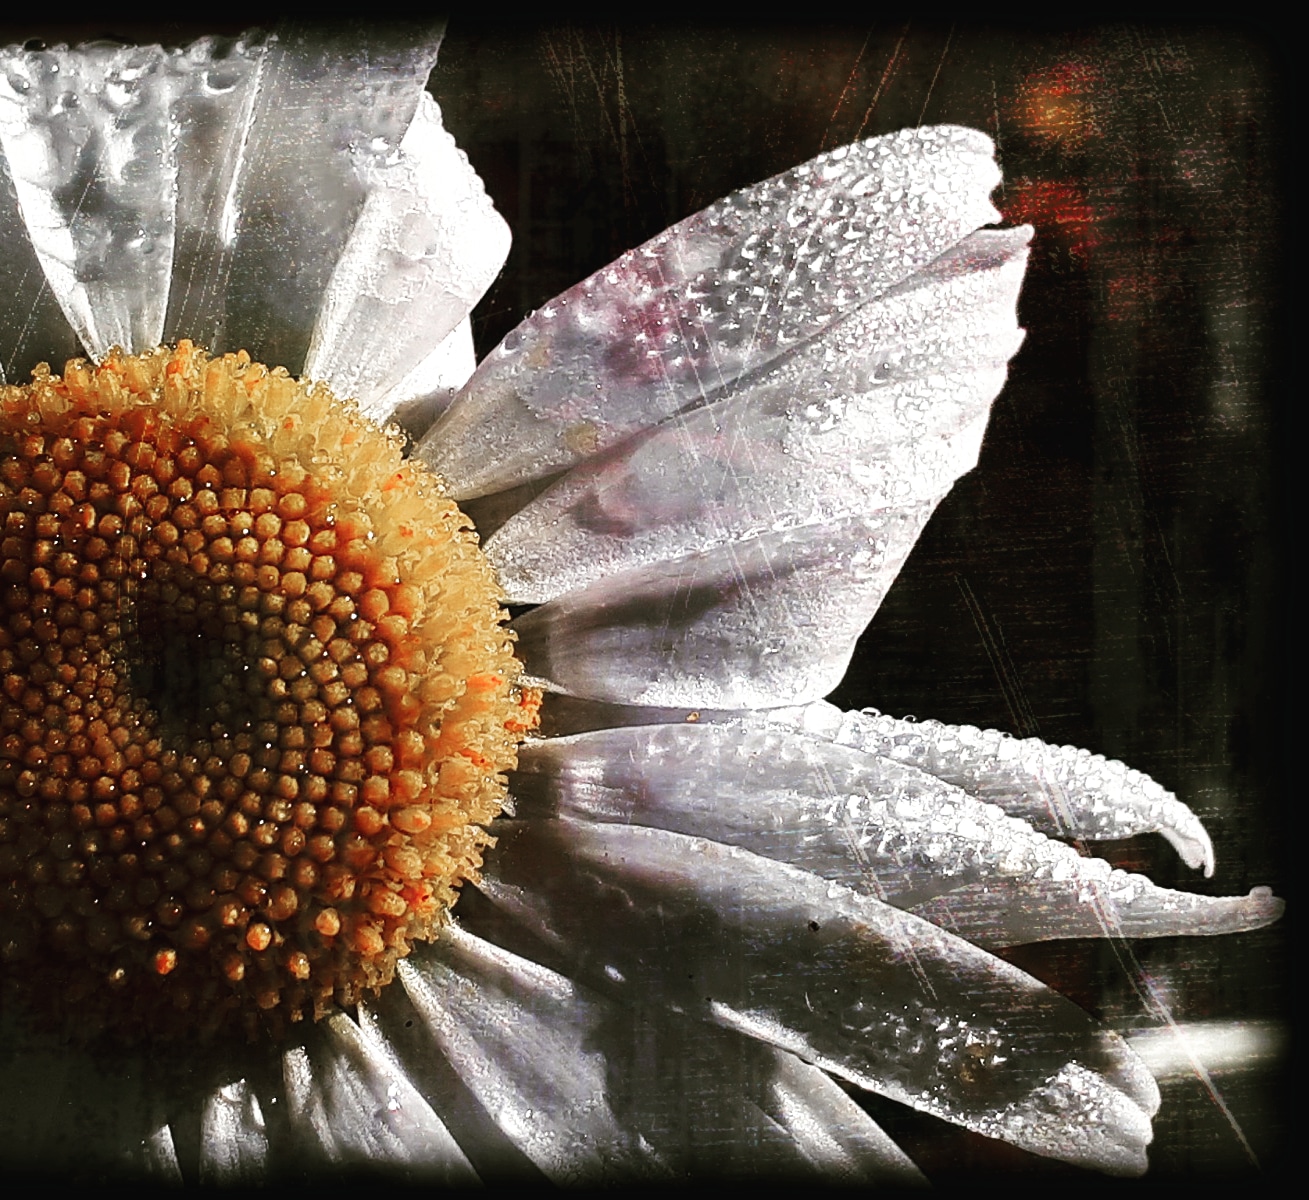 ISABELLE DeLAUNIERE "Morning Dew" 16"x16" photograph $275